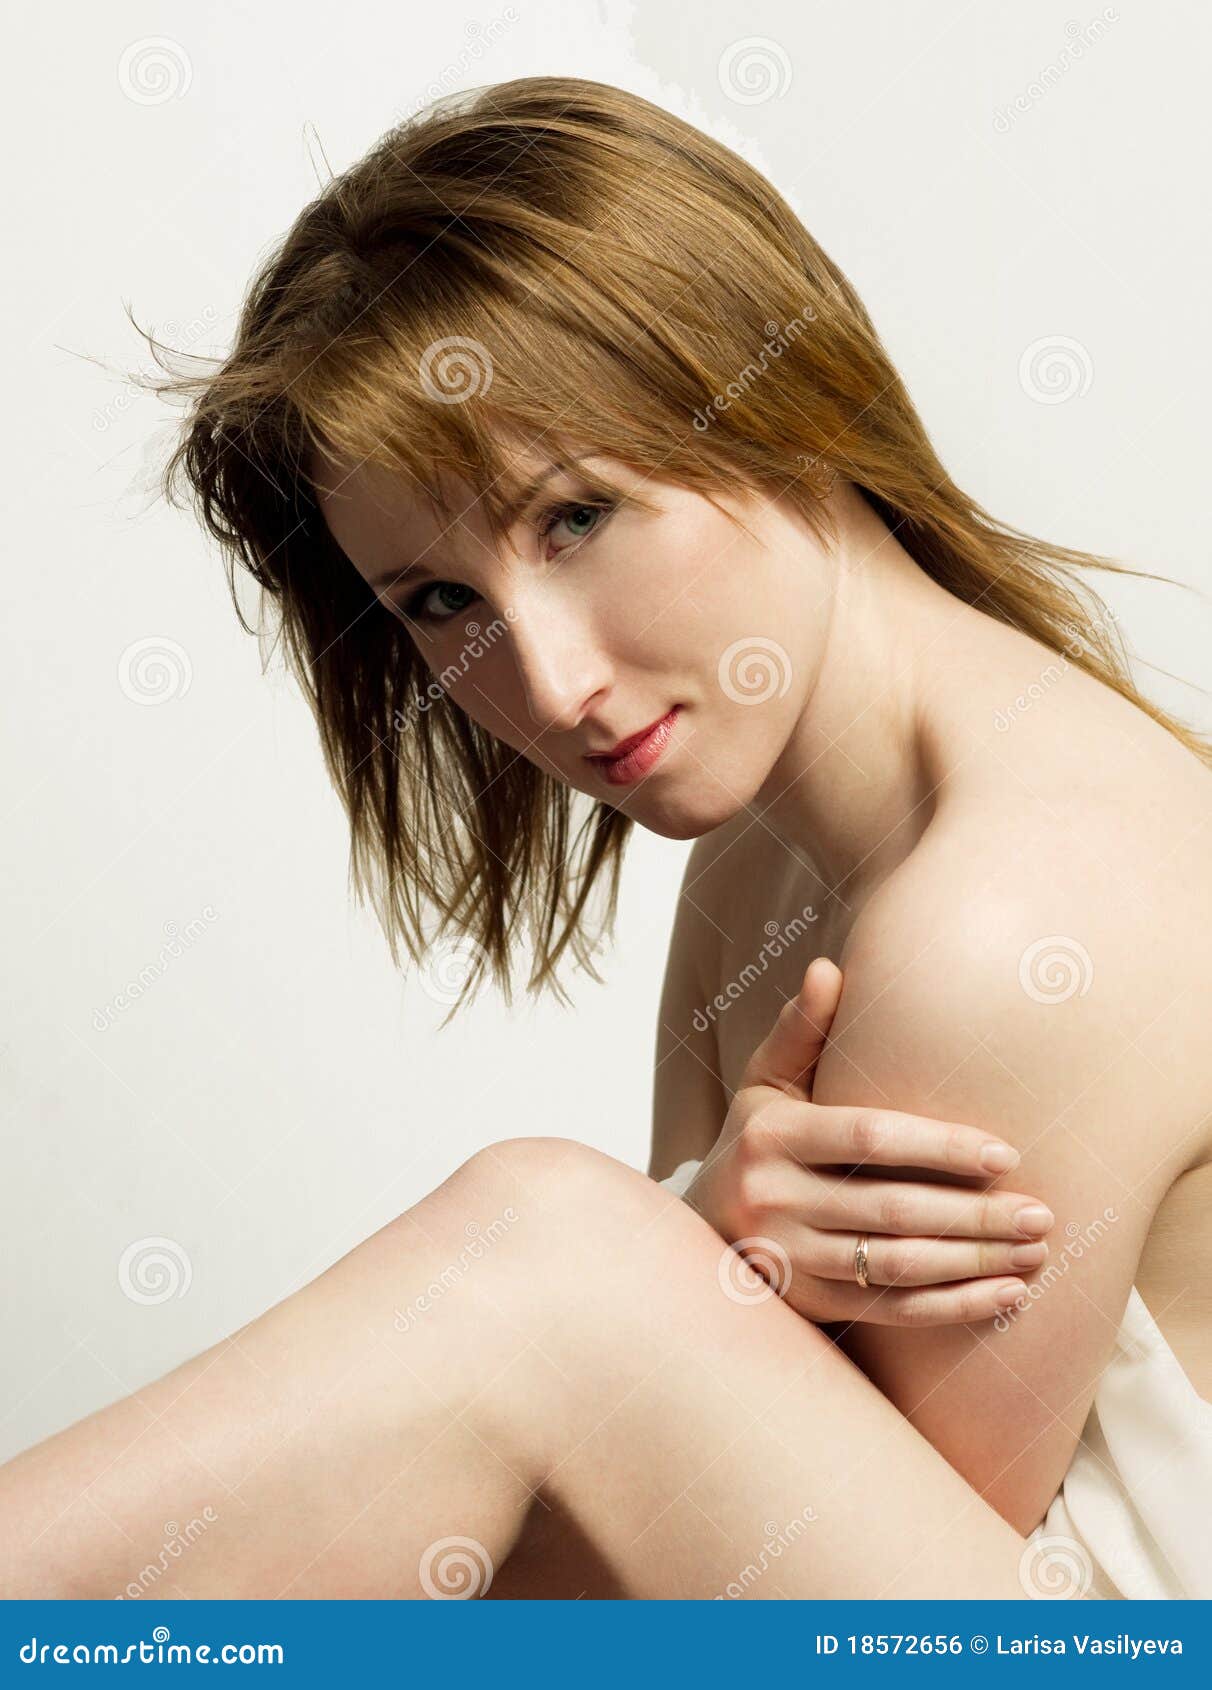 Young Naked Woman Picture